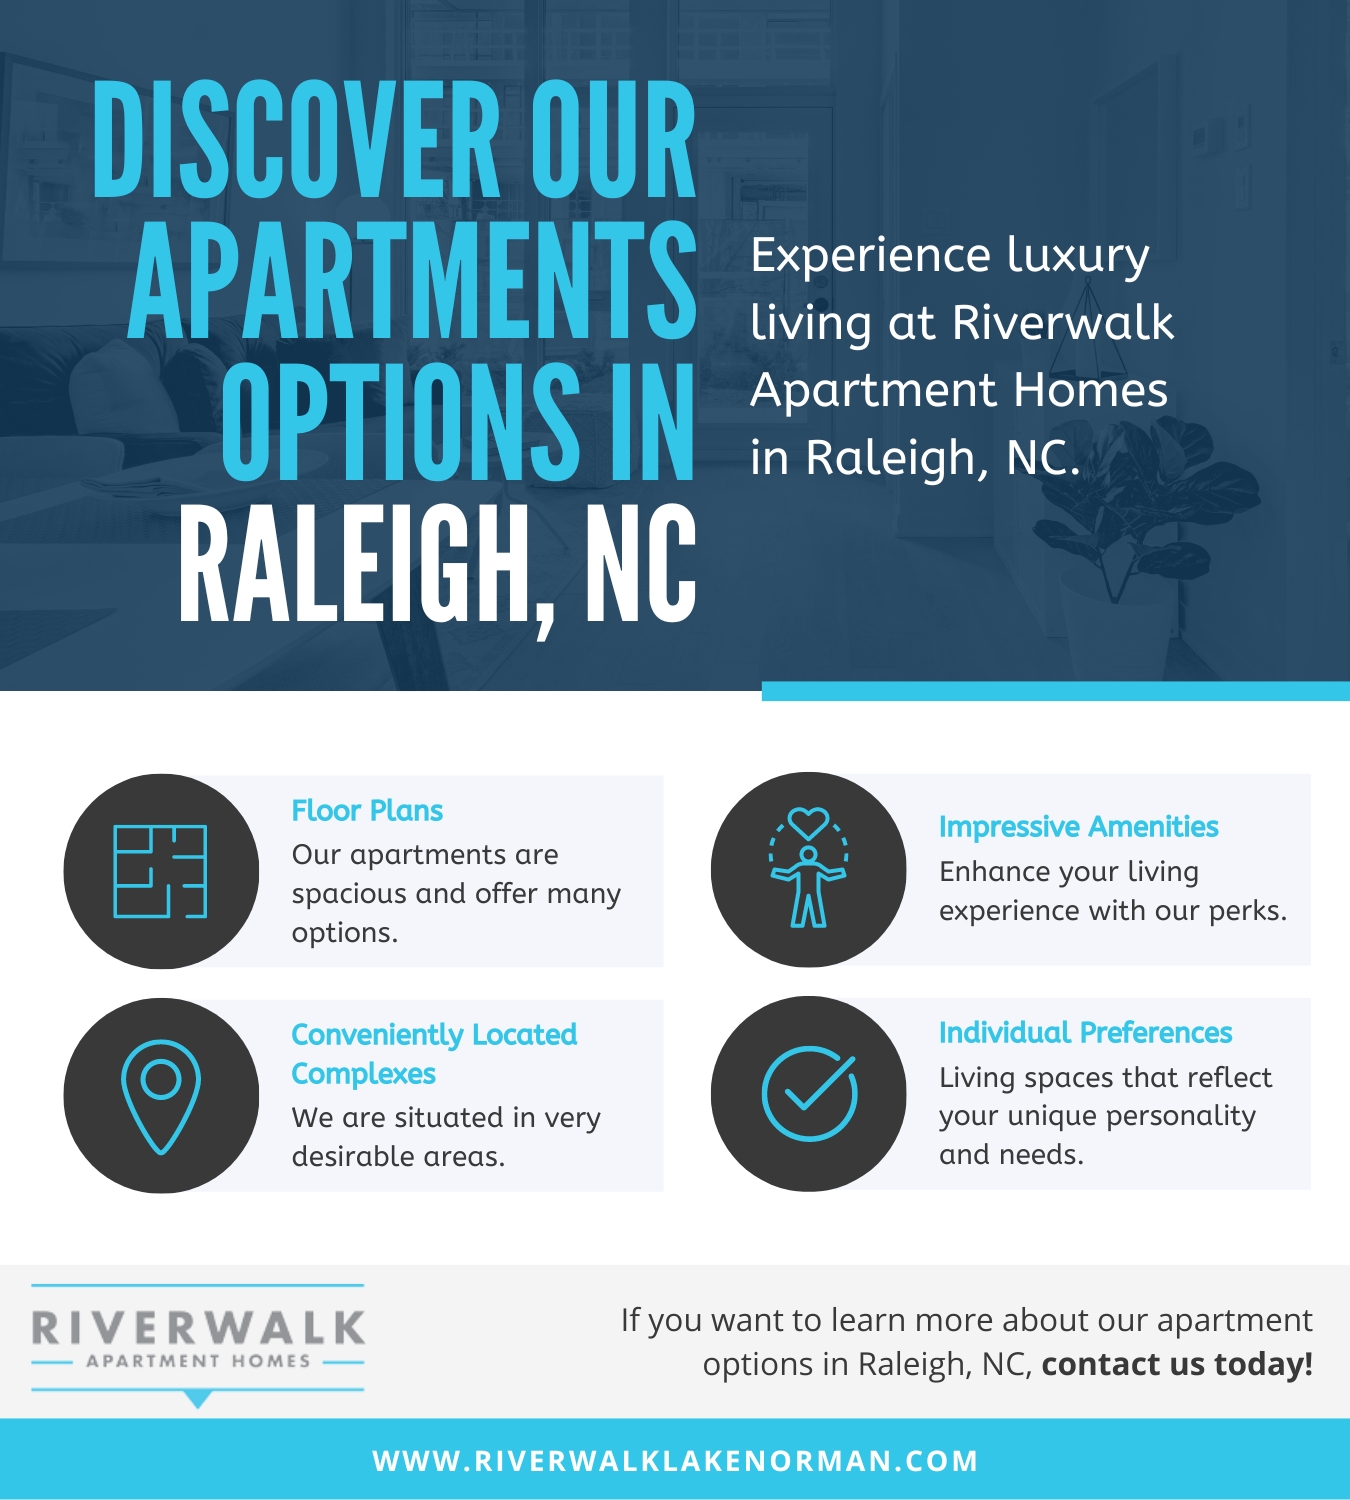 Discover Our Apartments Options In Raleigh, NC Infographic